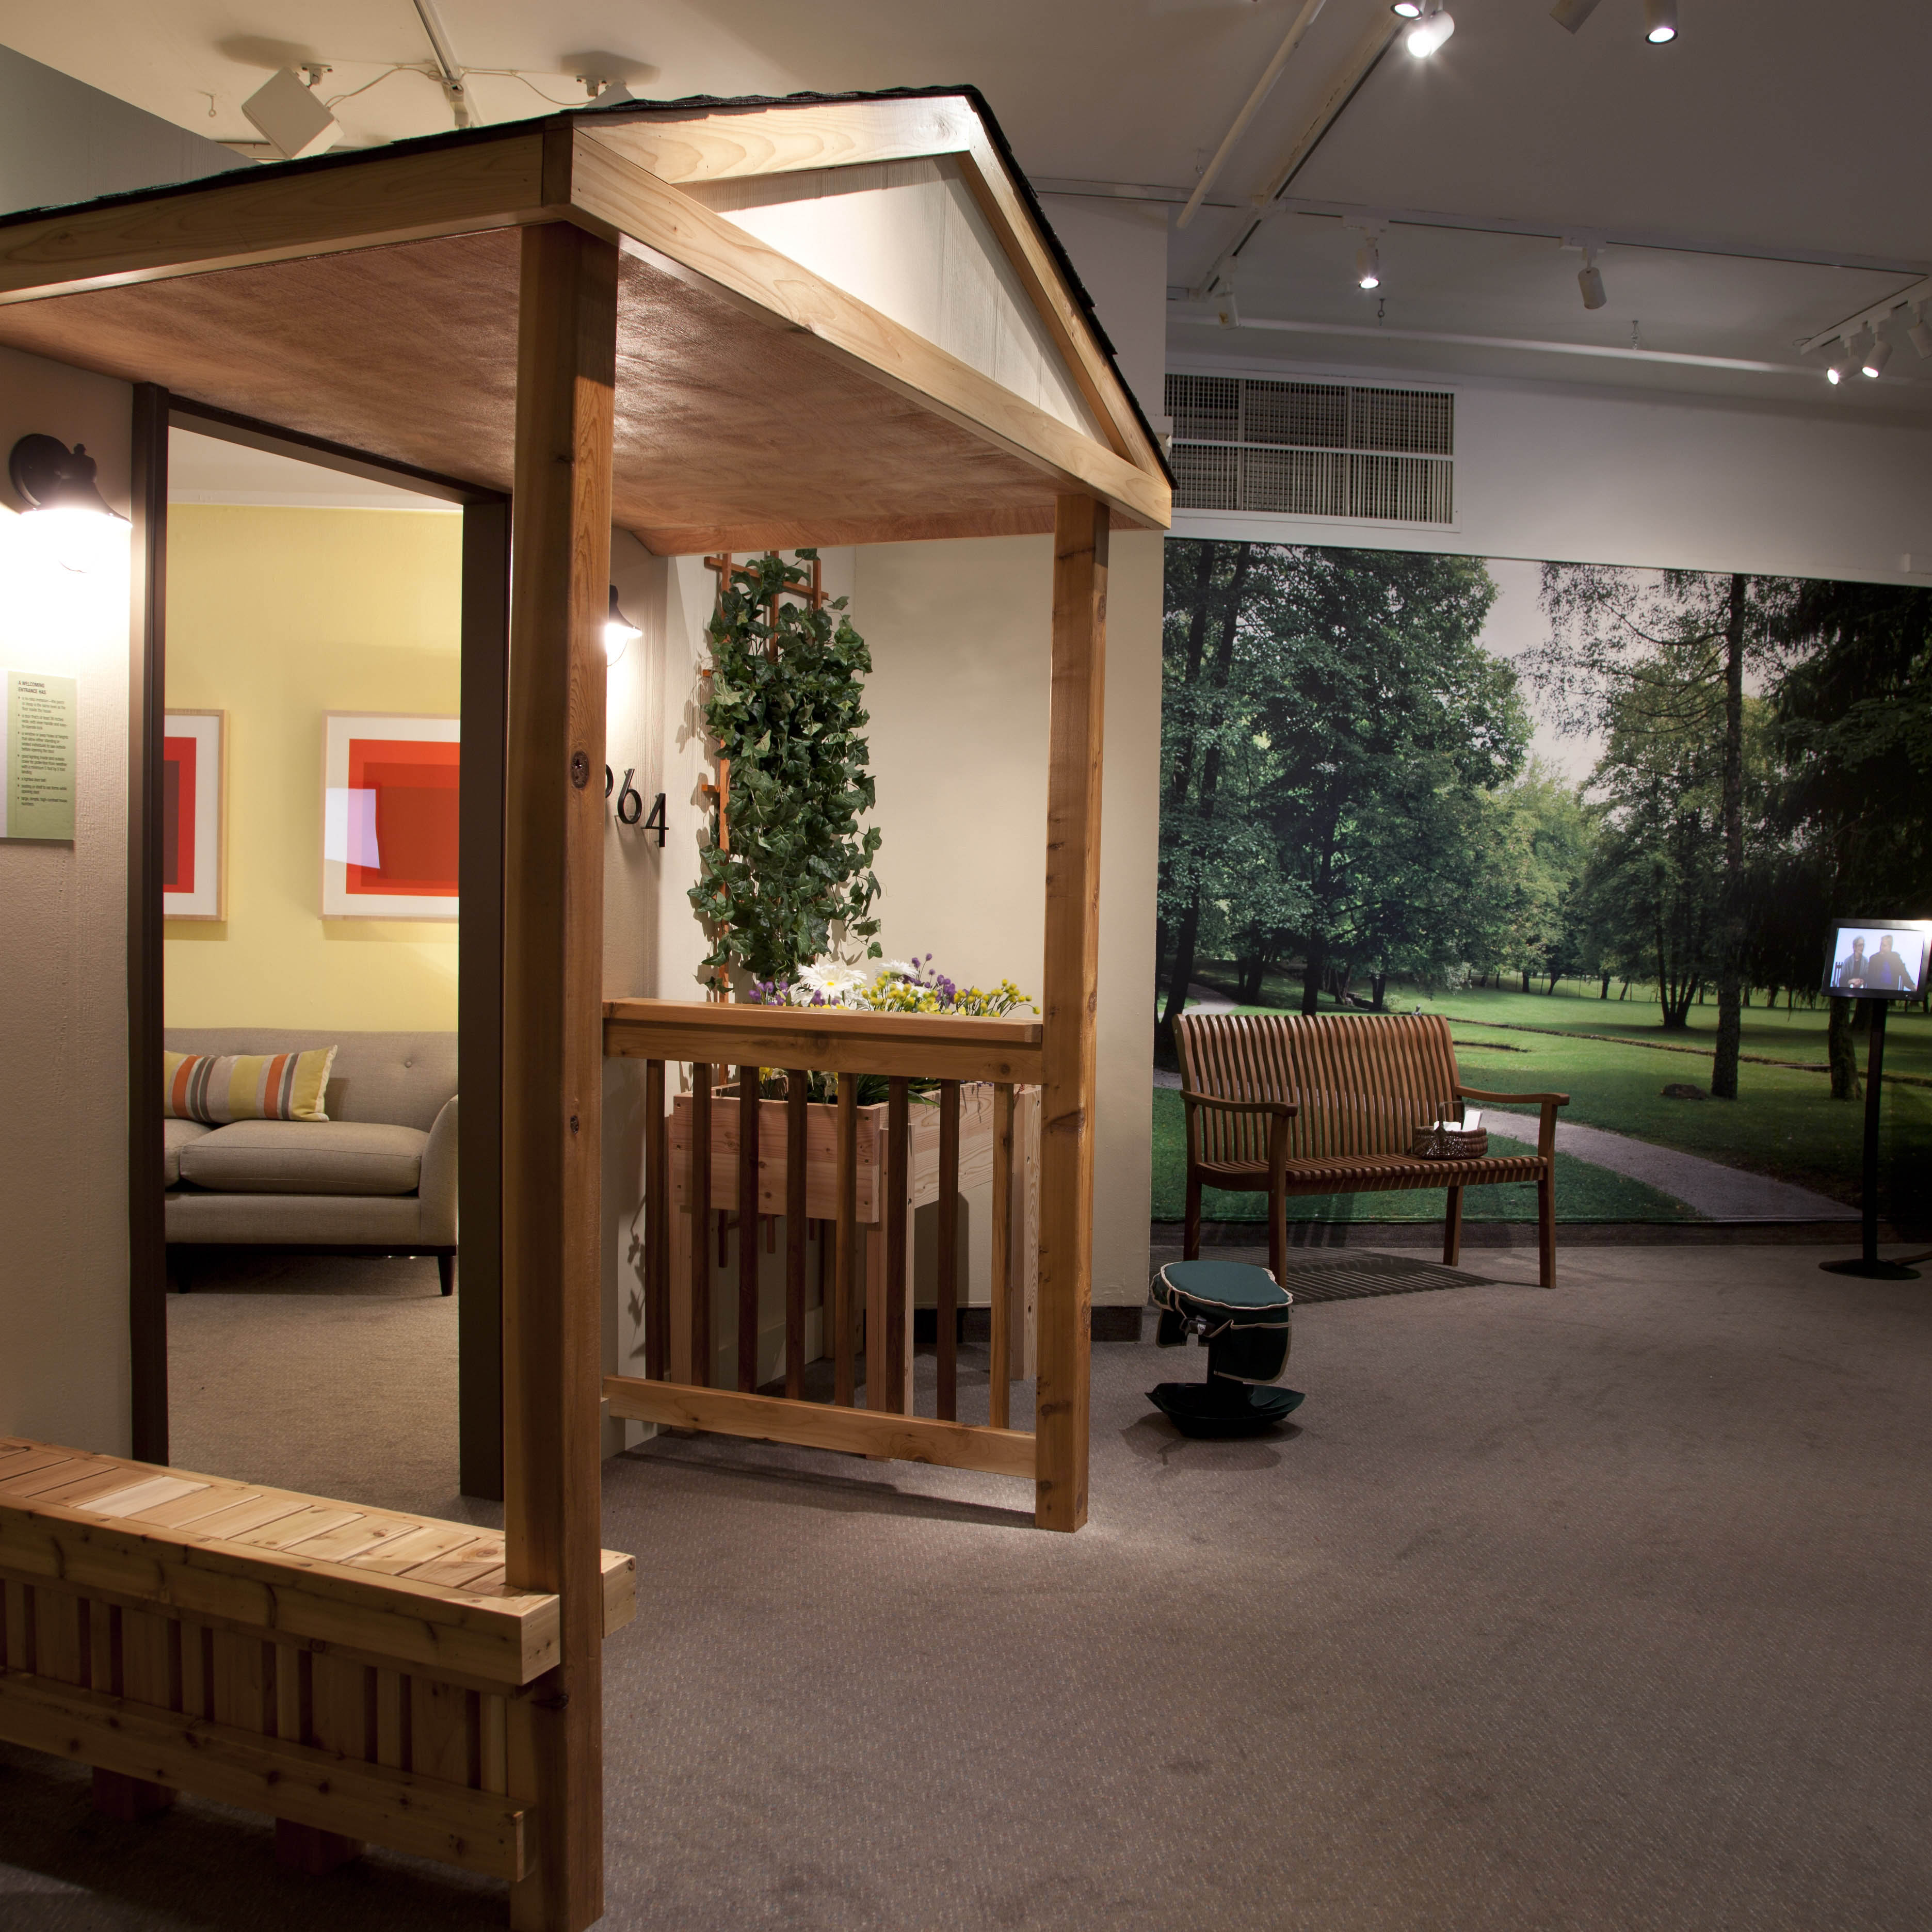 Smart House, Livable Community, Your Future exhibition with the gallery made into a home